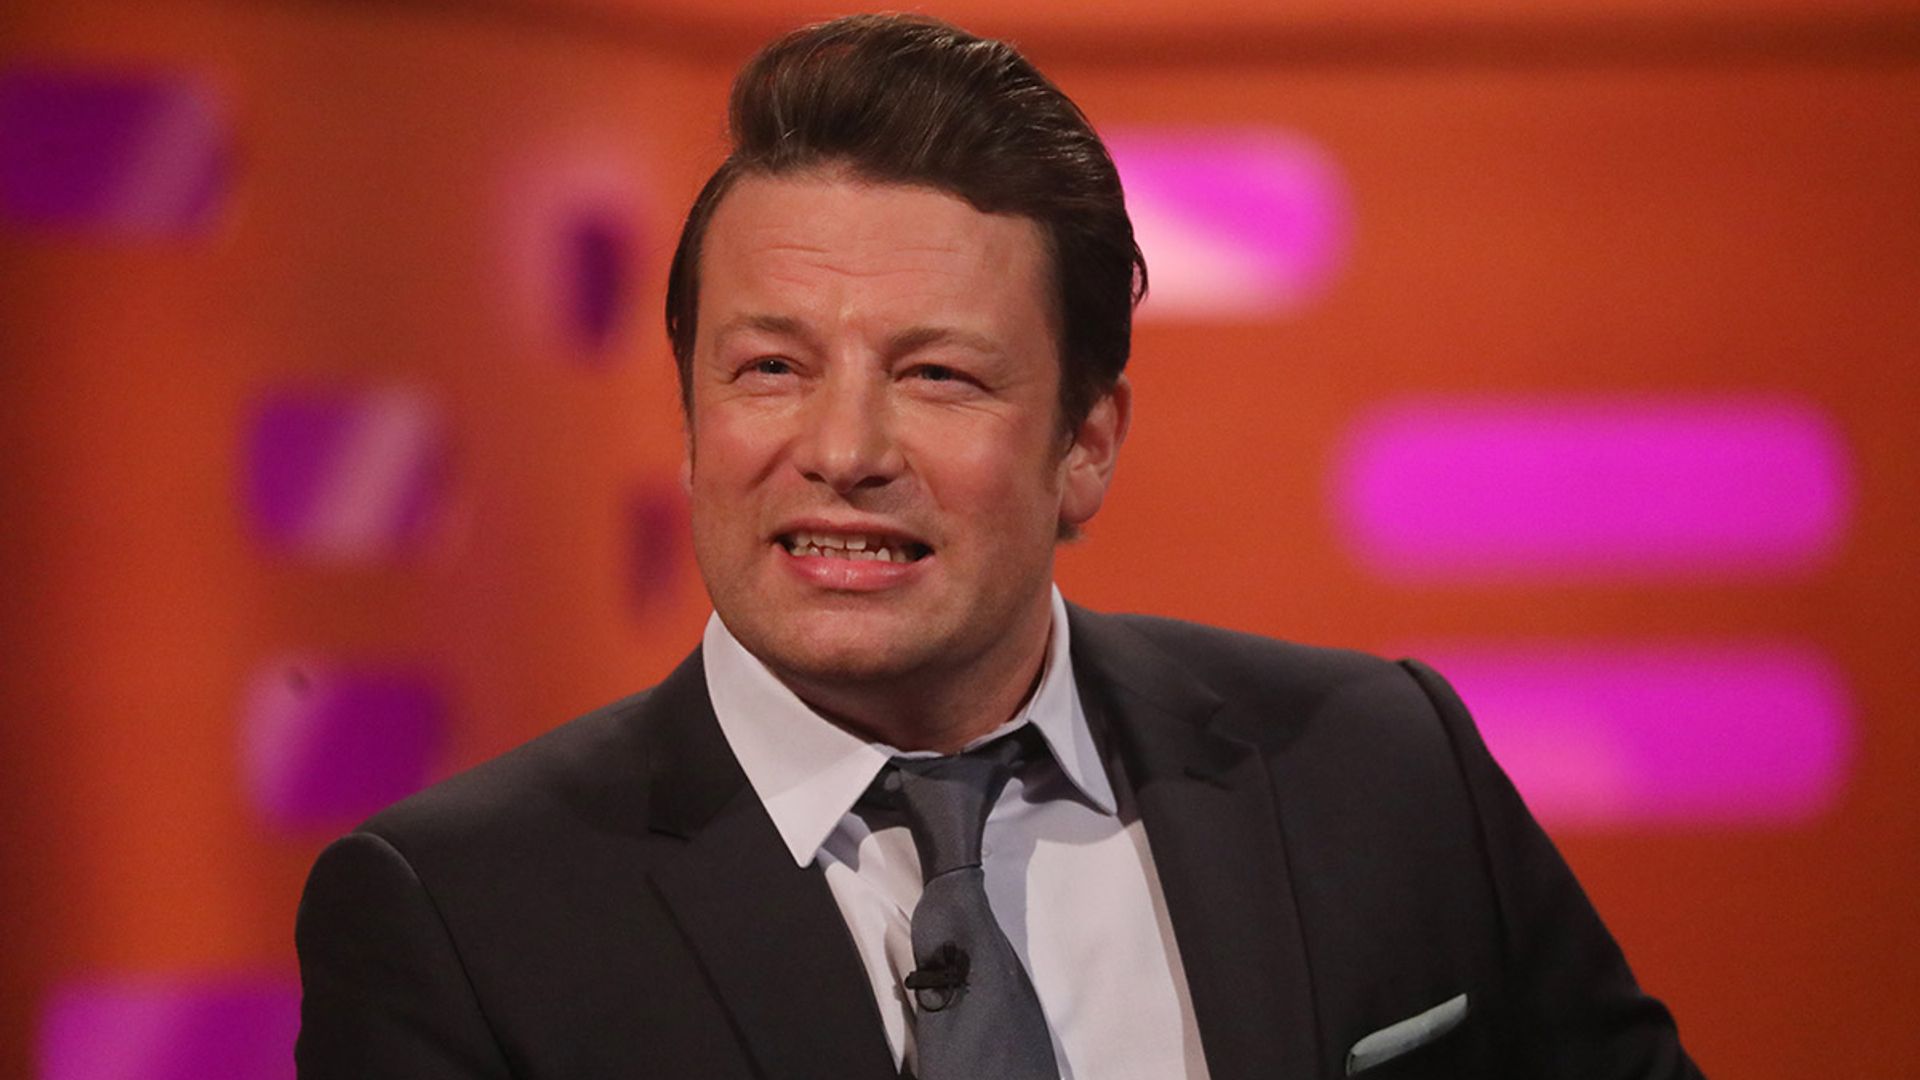 Mini-me chefs! Jamie Oliver's son Buddy looks just like dad as they cook together in new photo